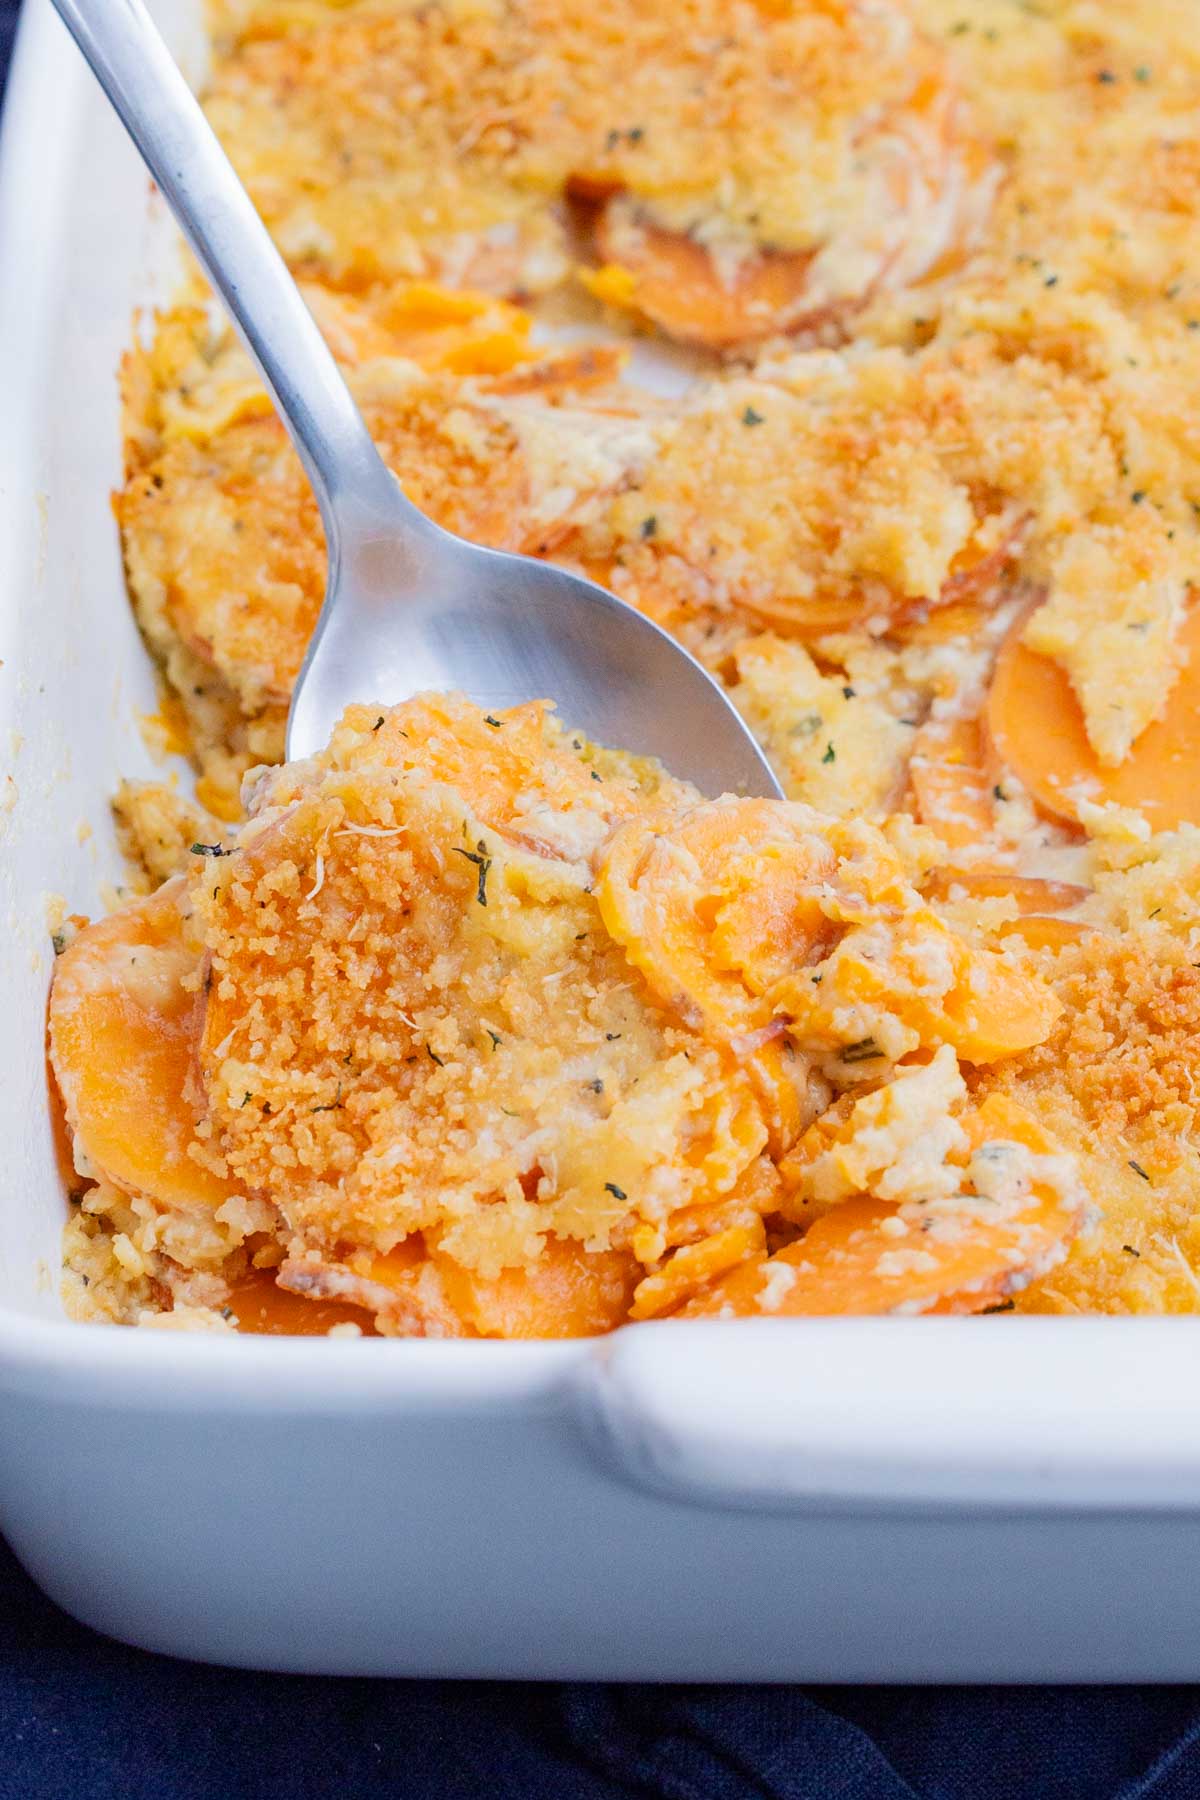 A metal spoon is used to scoop sweet potato au gratin from a casserole dish.